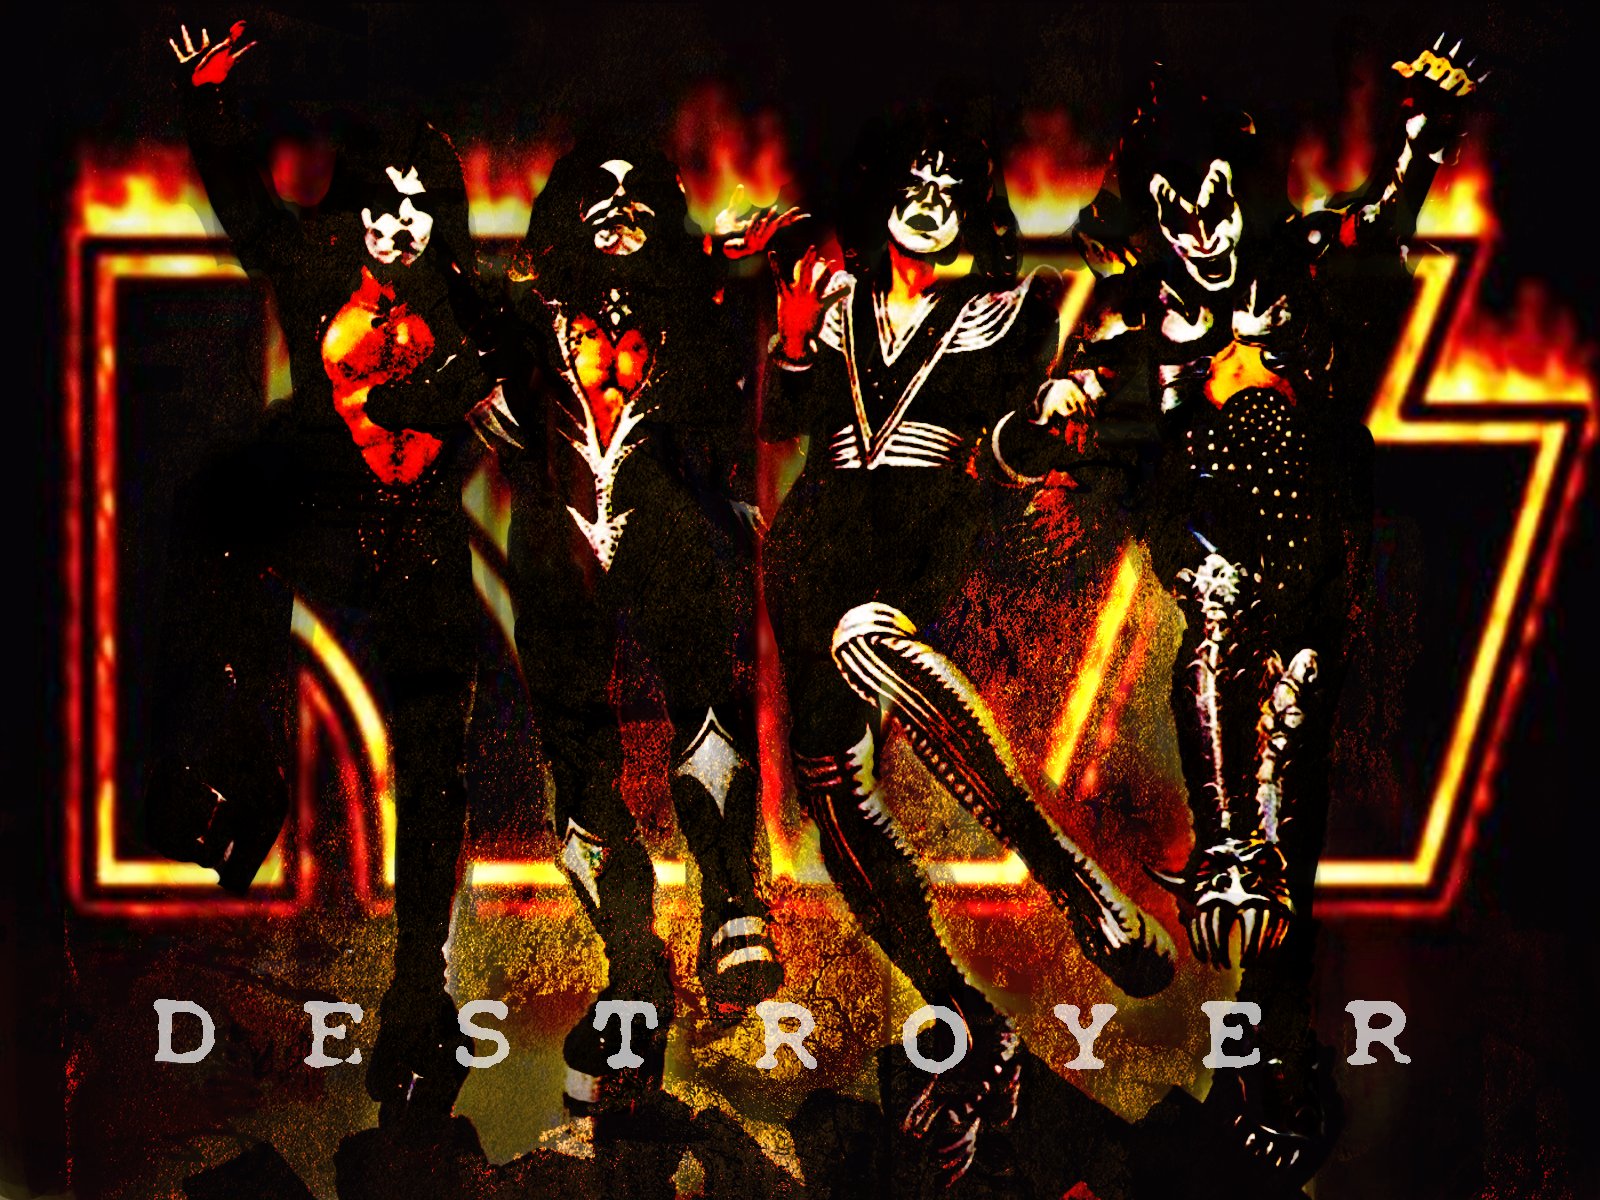 Kiss Image Destroyer HD Wallpaper And Background Photos